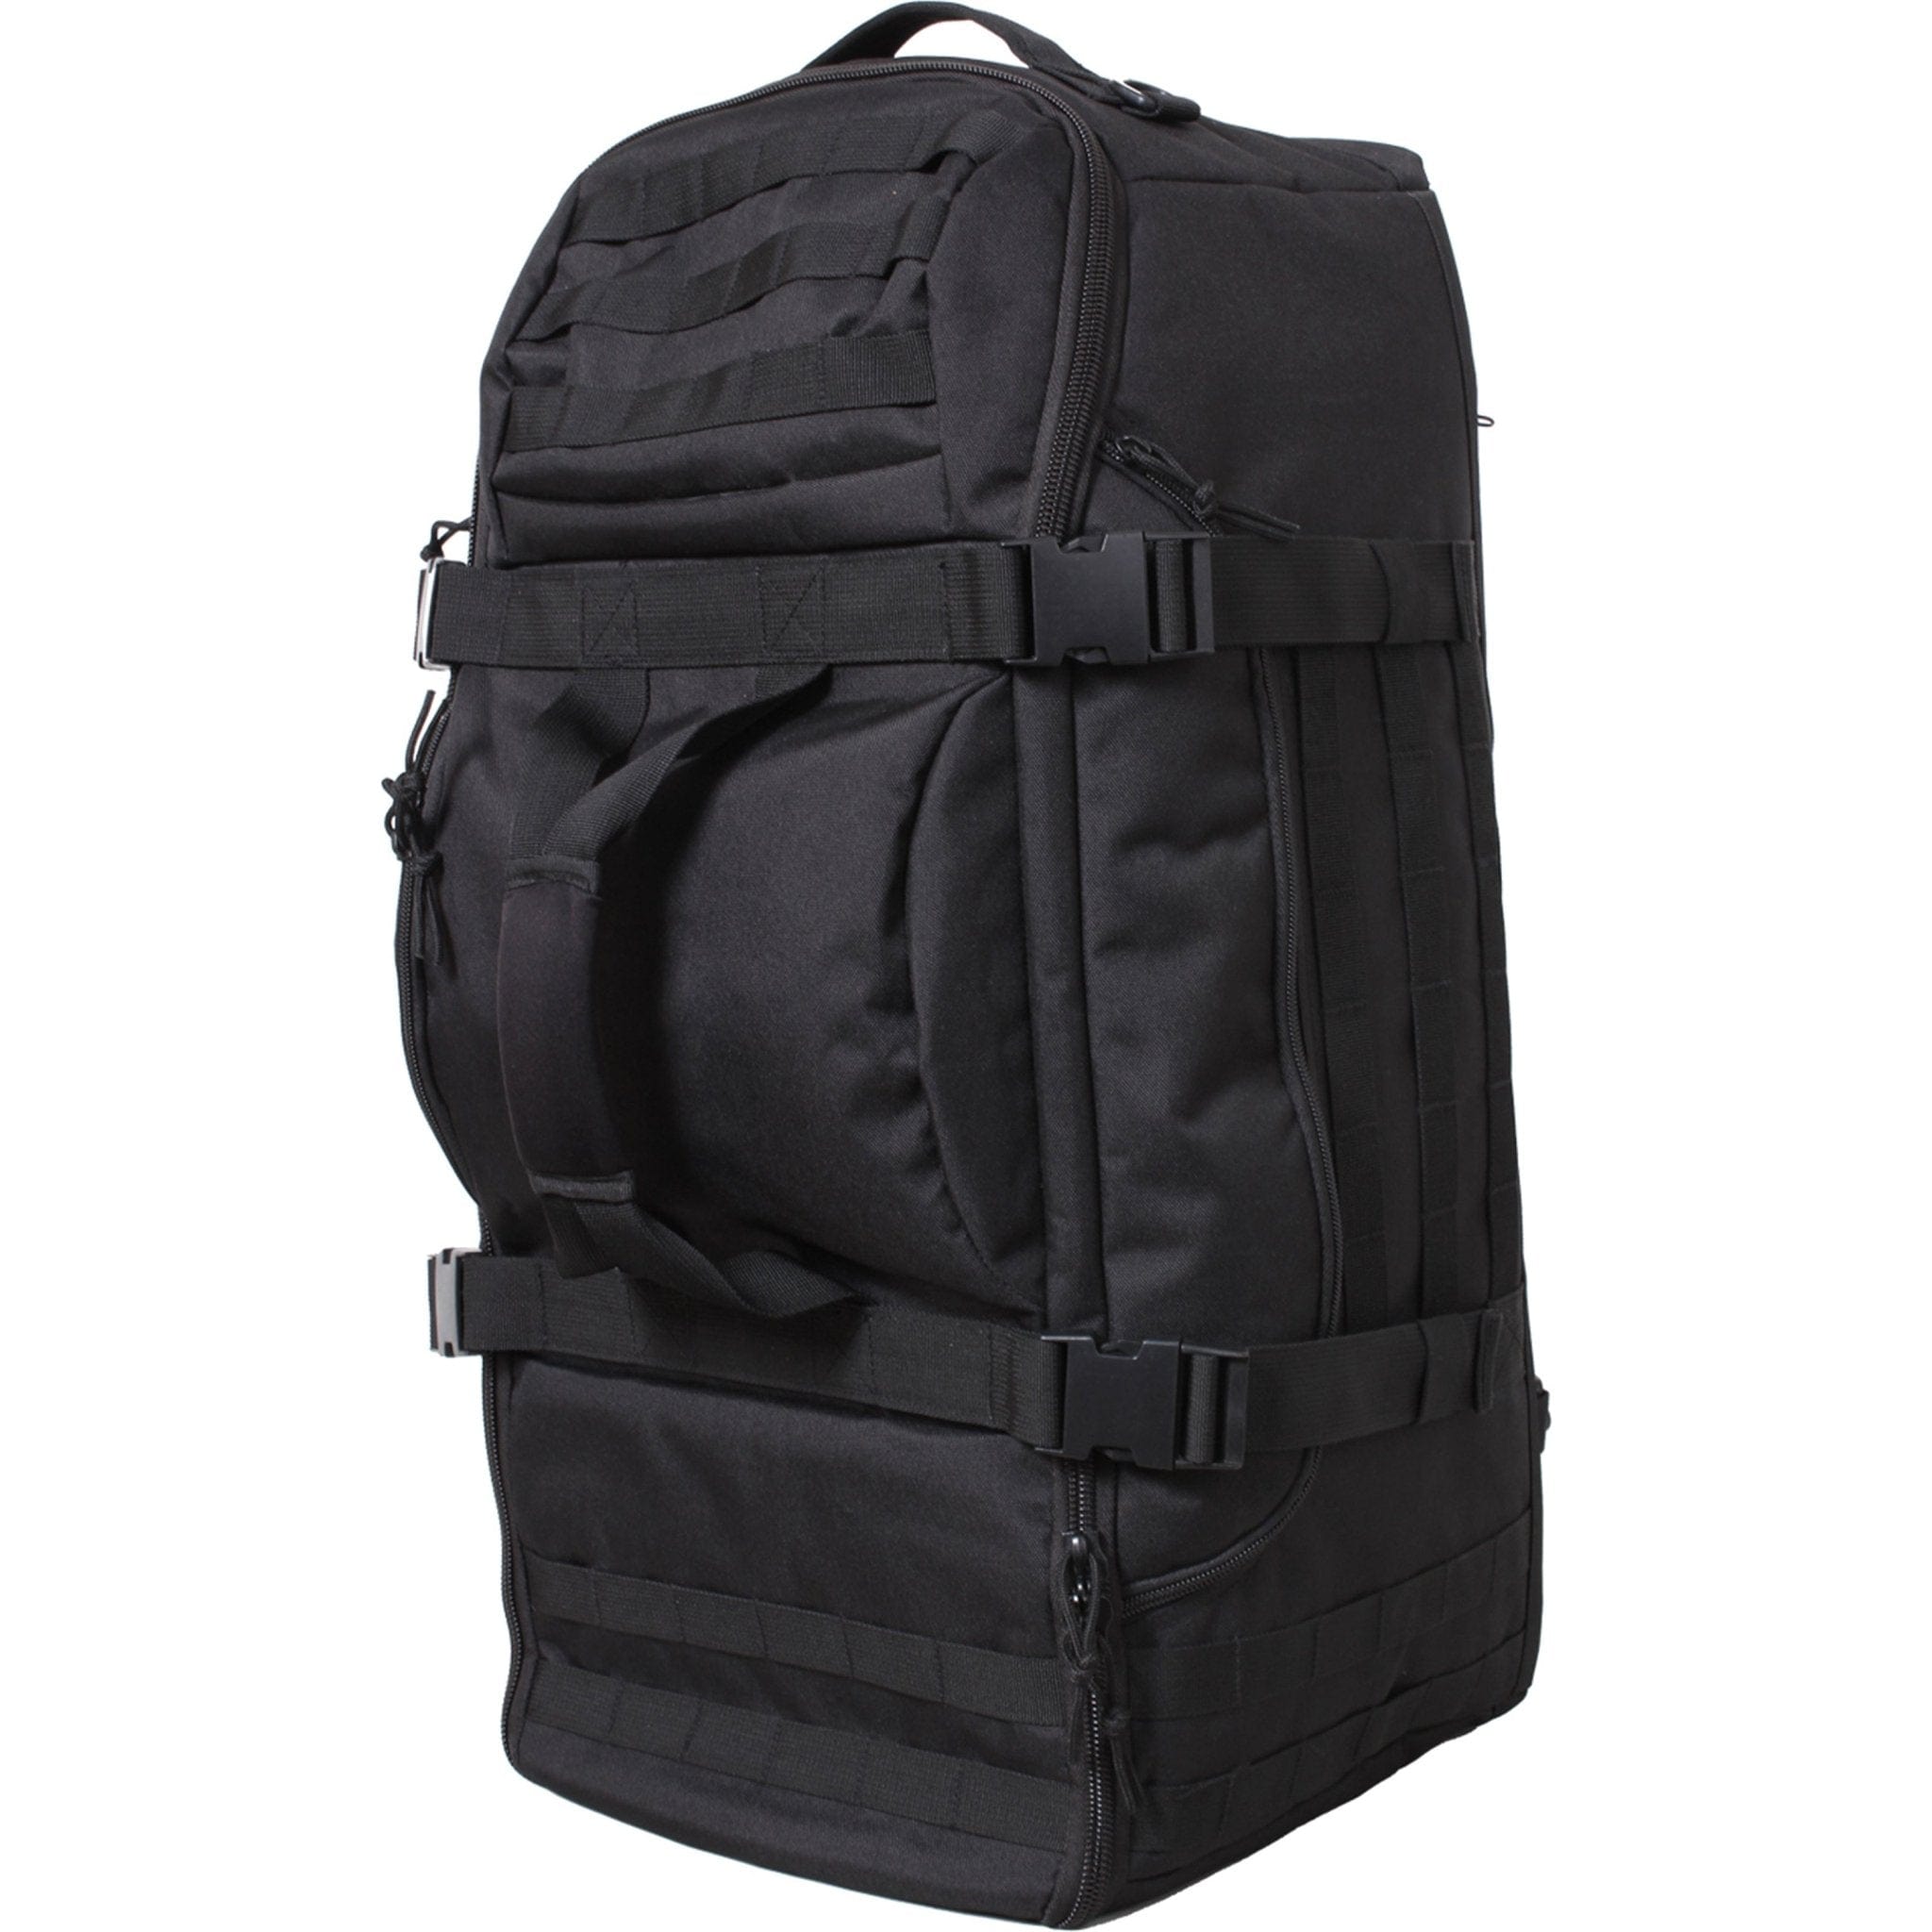 3 in 1 Convertible Mission Bag - PilotMall.com